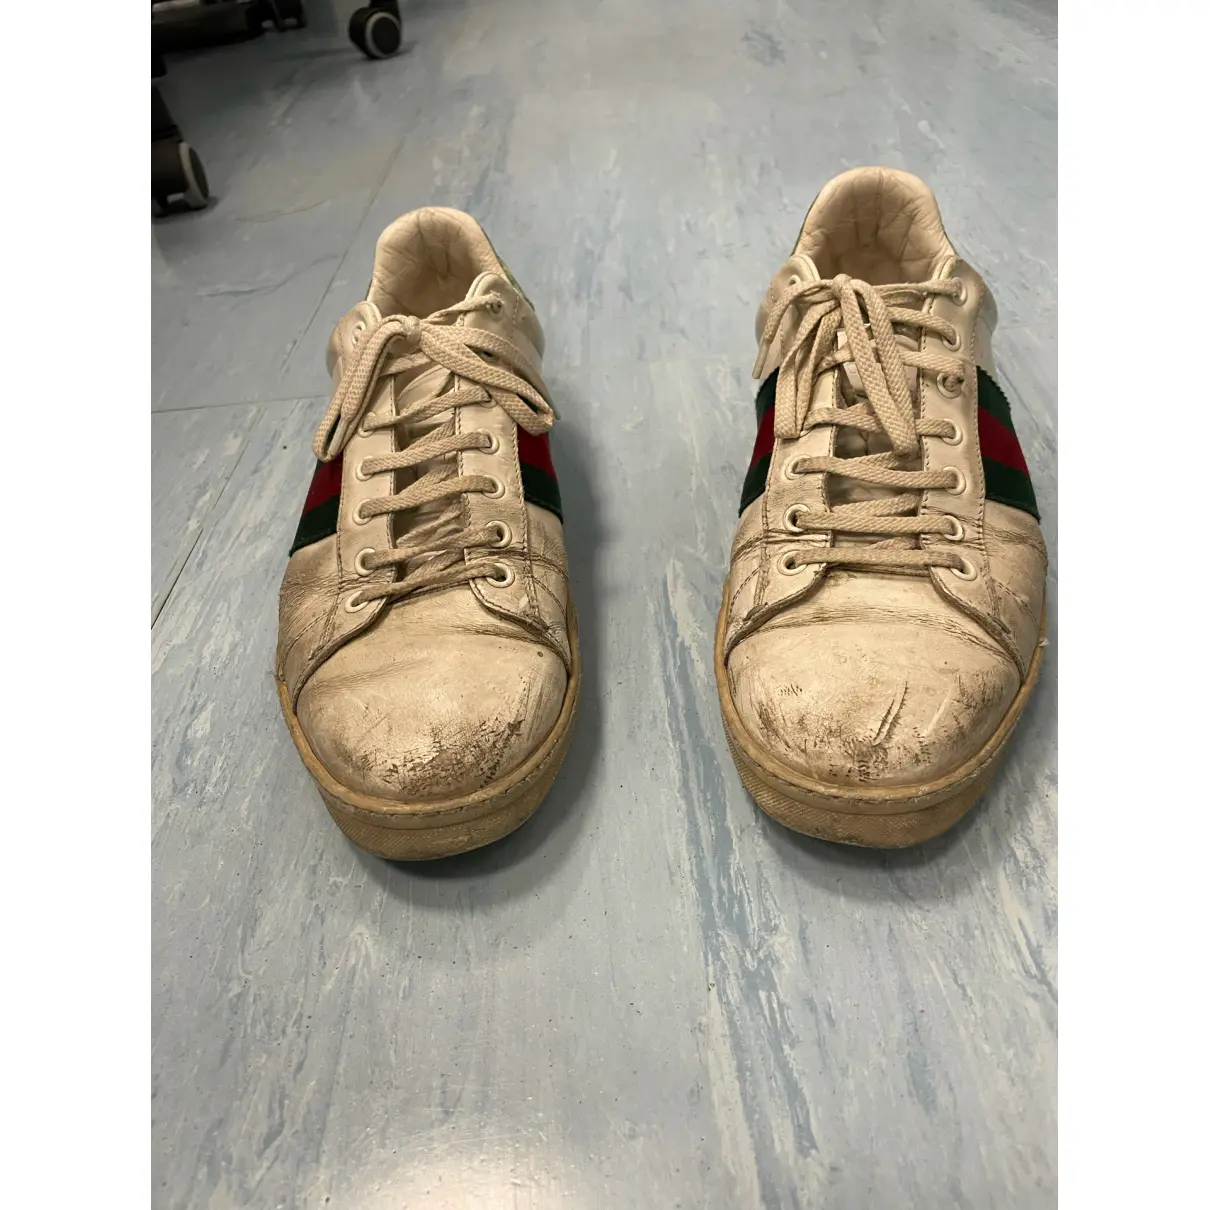 Buy Gucci Ace leather low trainers online - Vintage